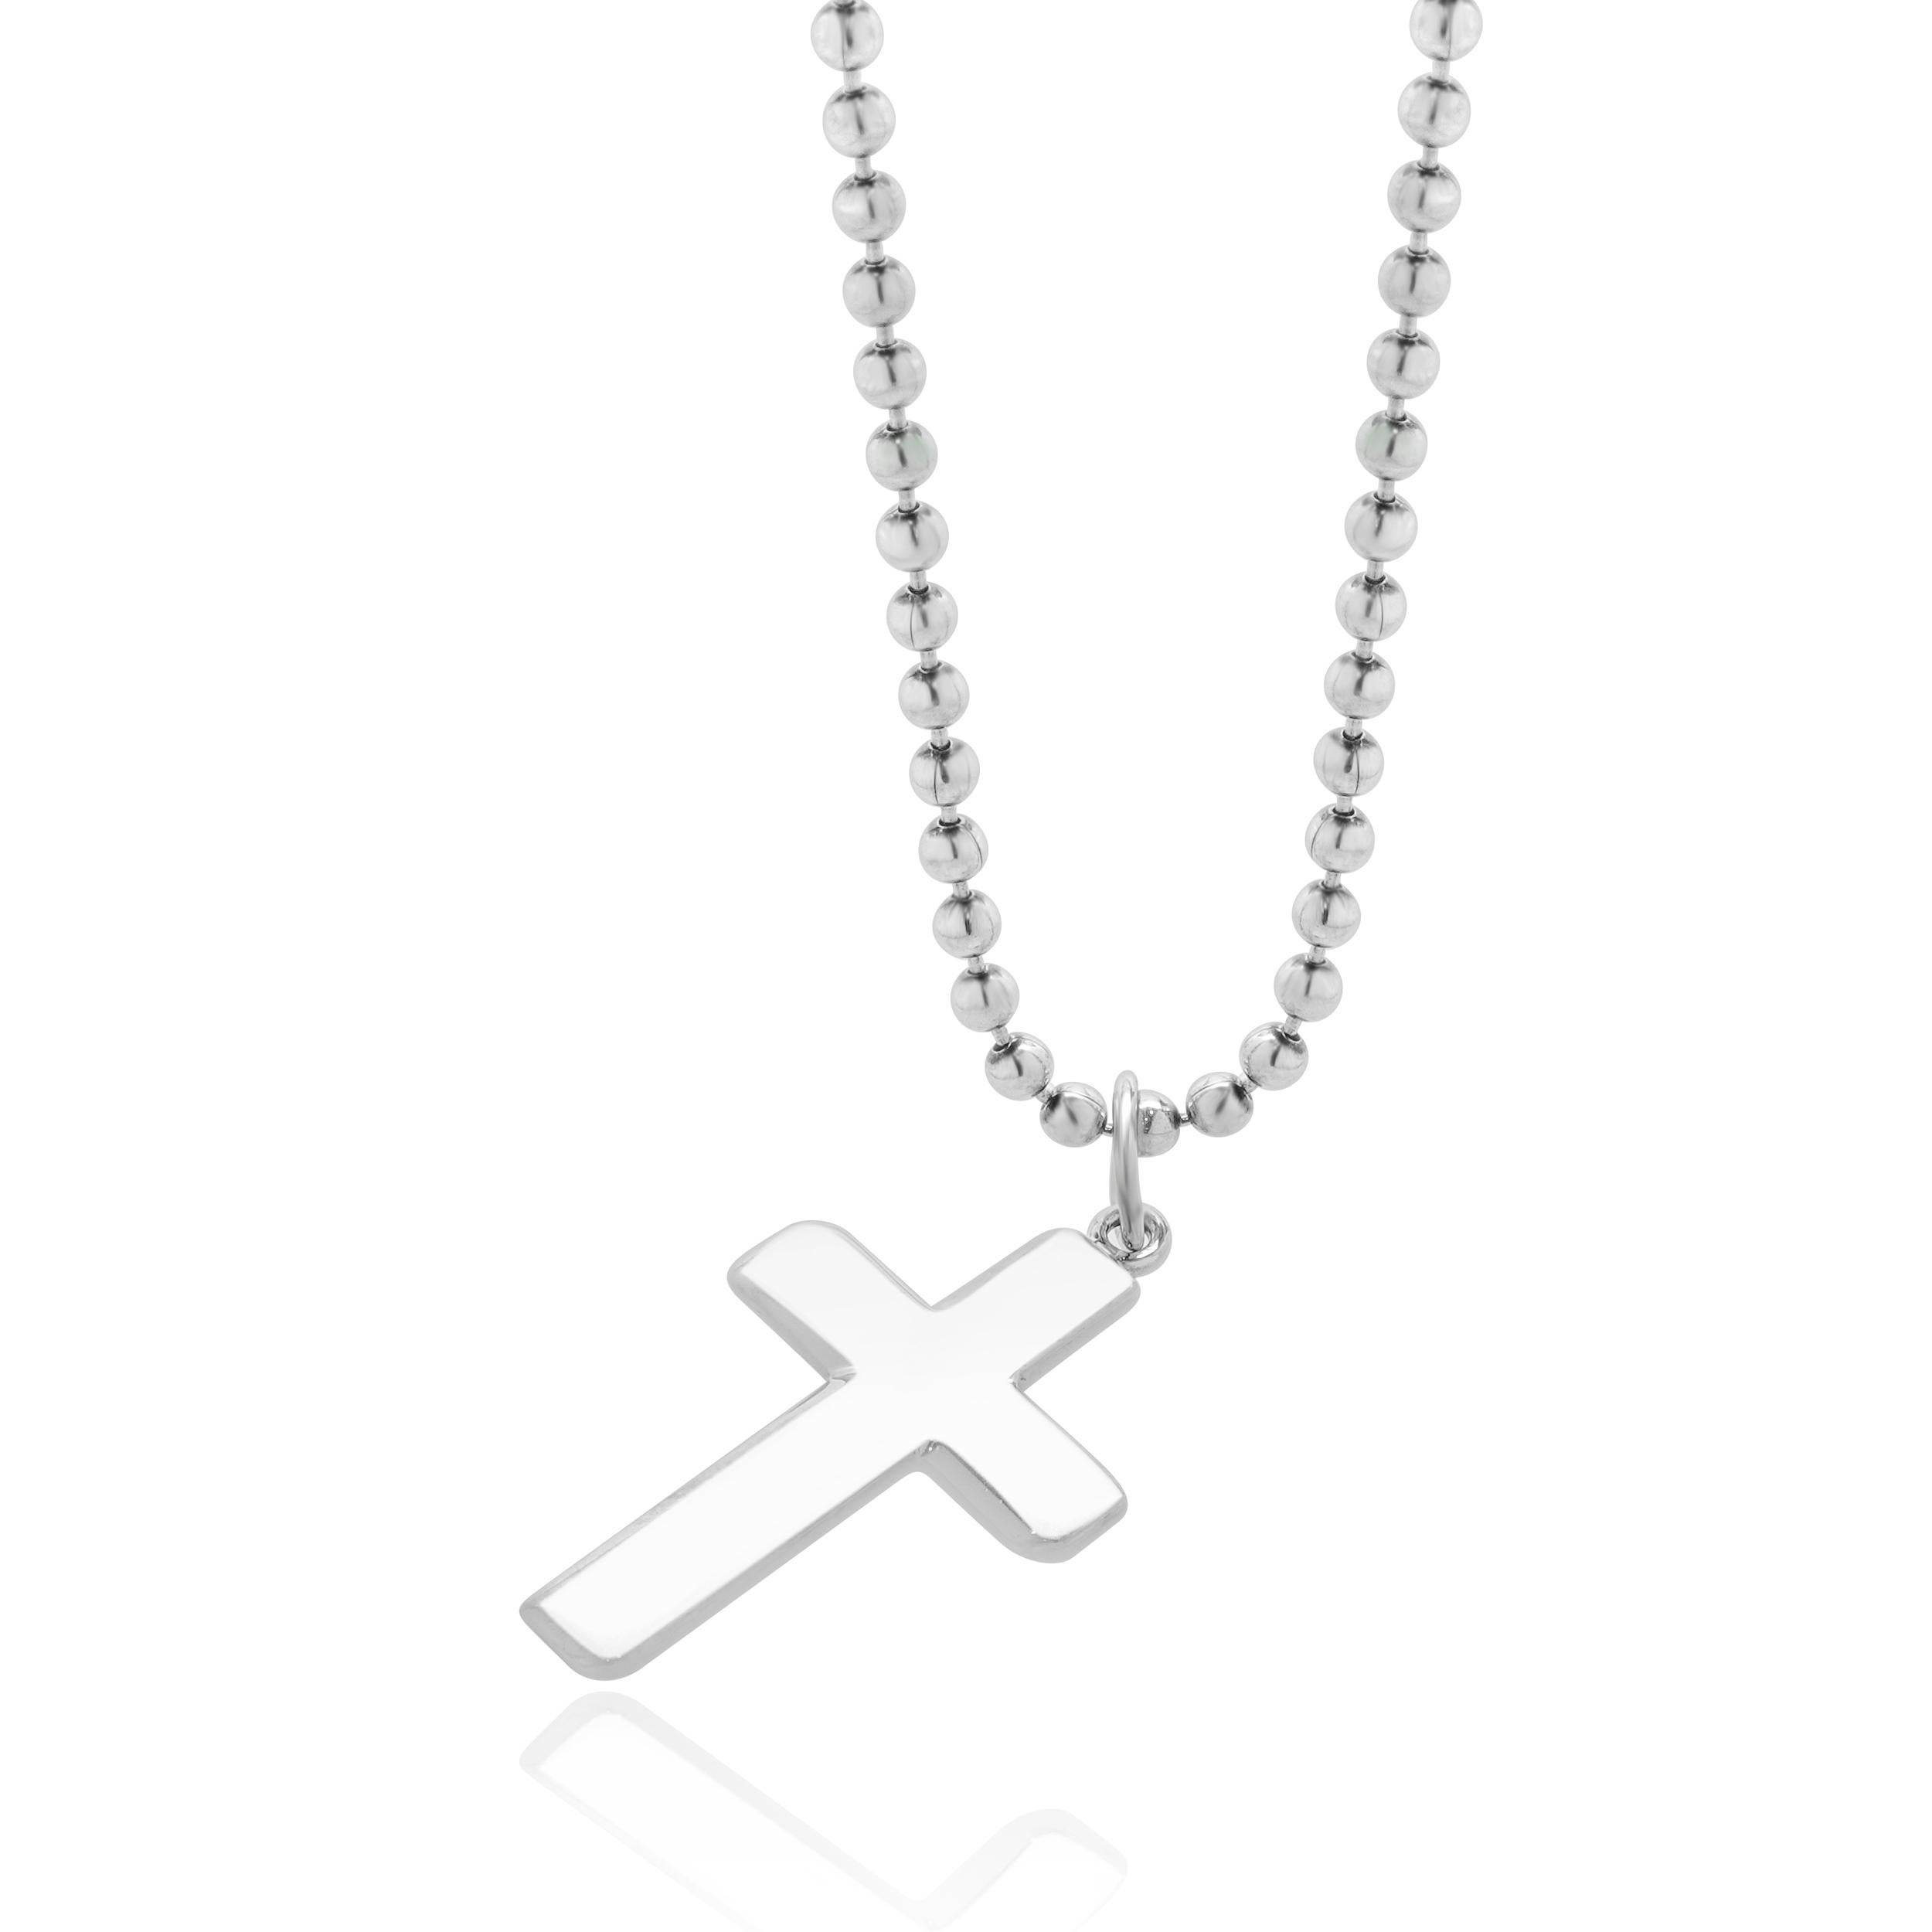 Women's or Men's Sterling Silver Cross Necklace For Sale